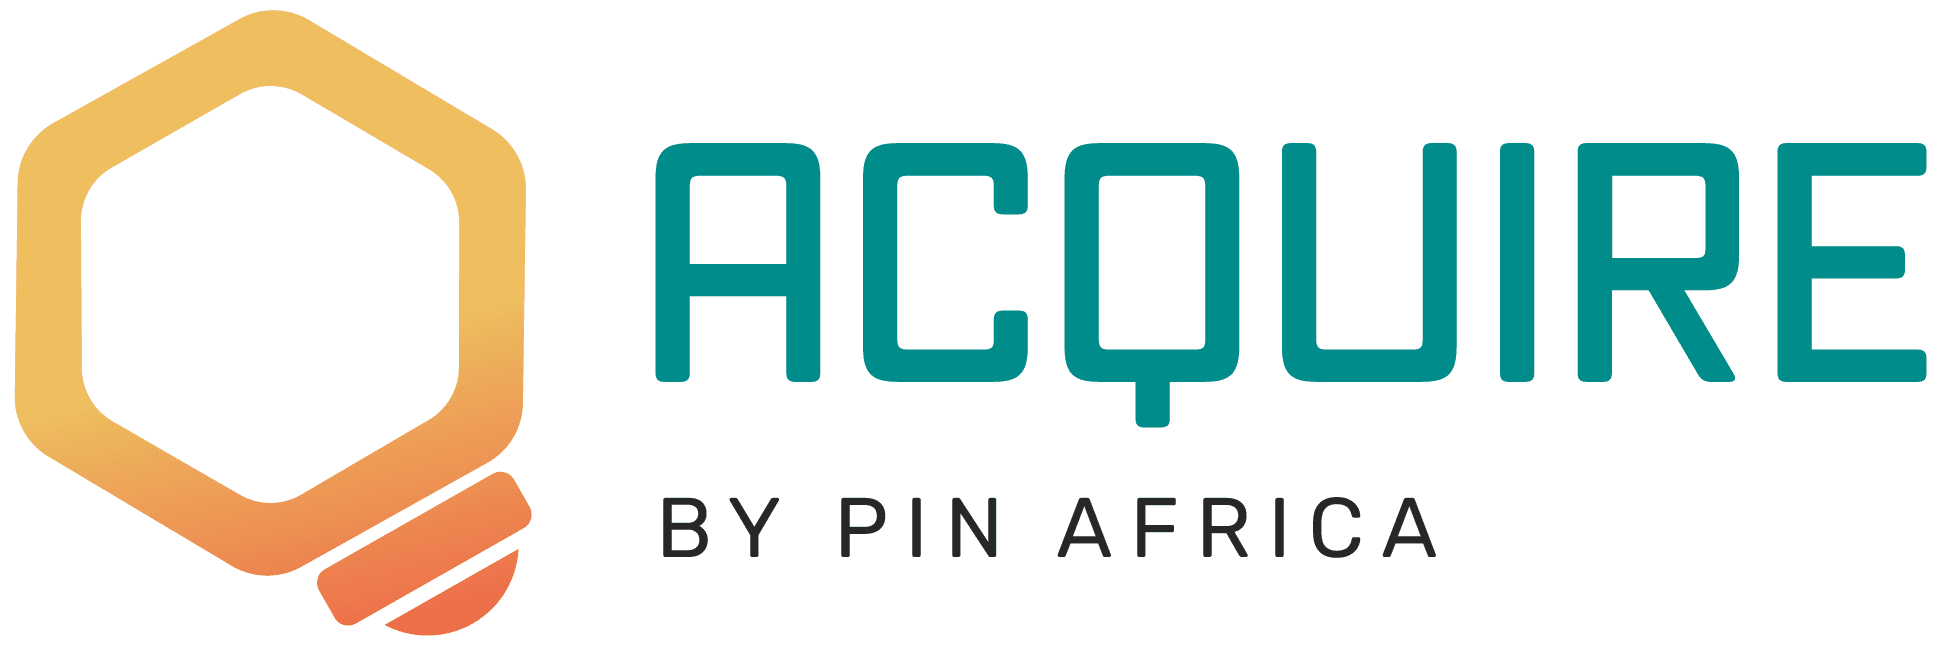 Acquire by Pin Africa